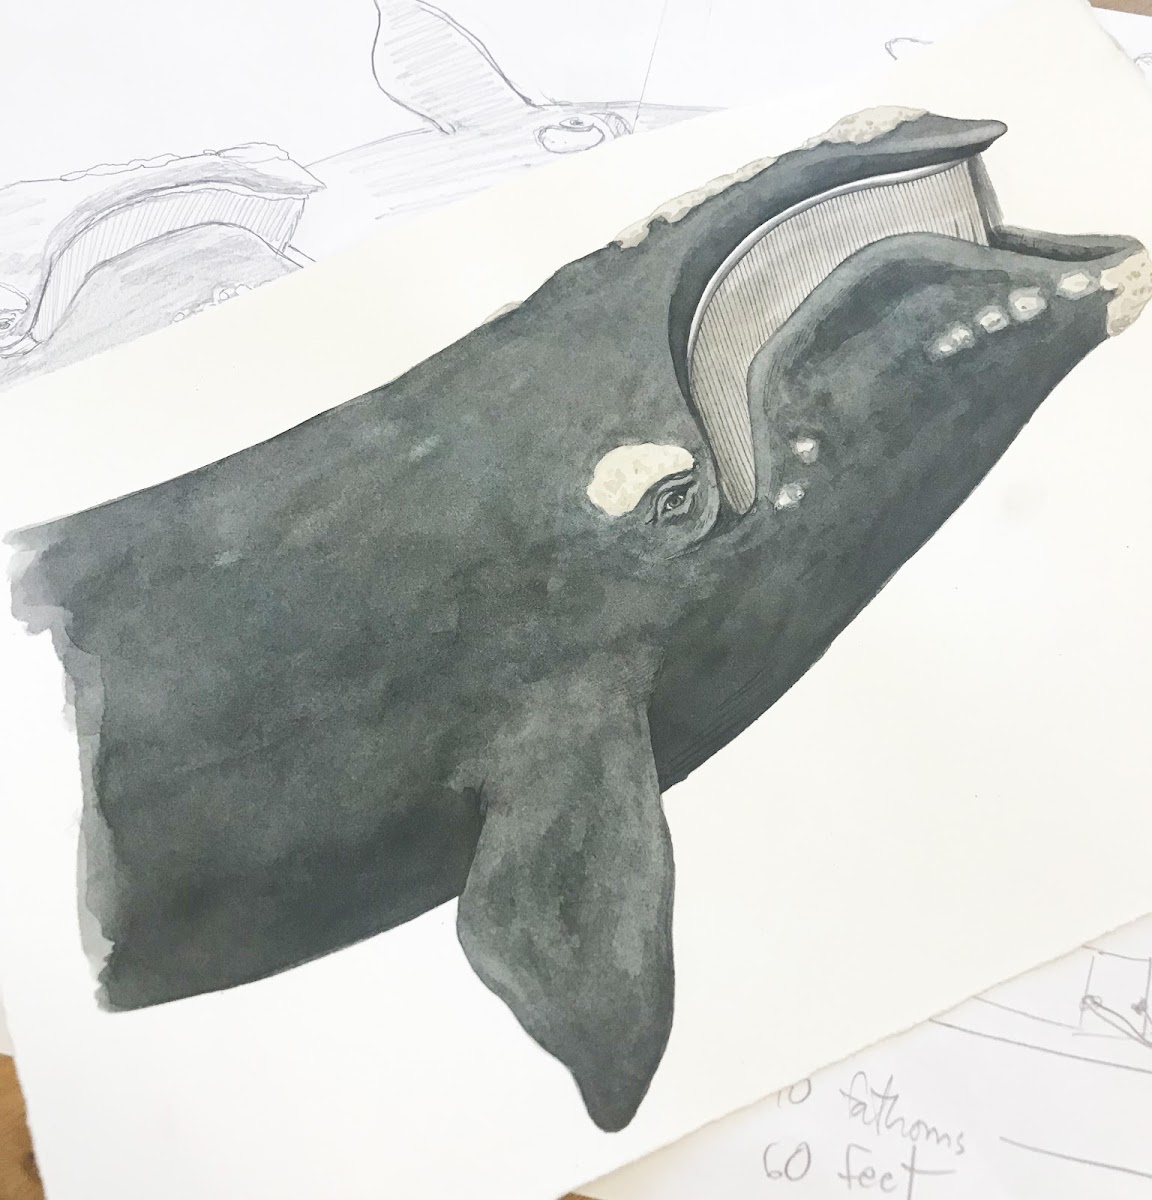 Sketch of whale with baleen by Illustration faculty member Joe McKendry 94 IL